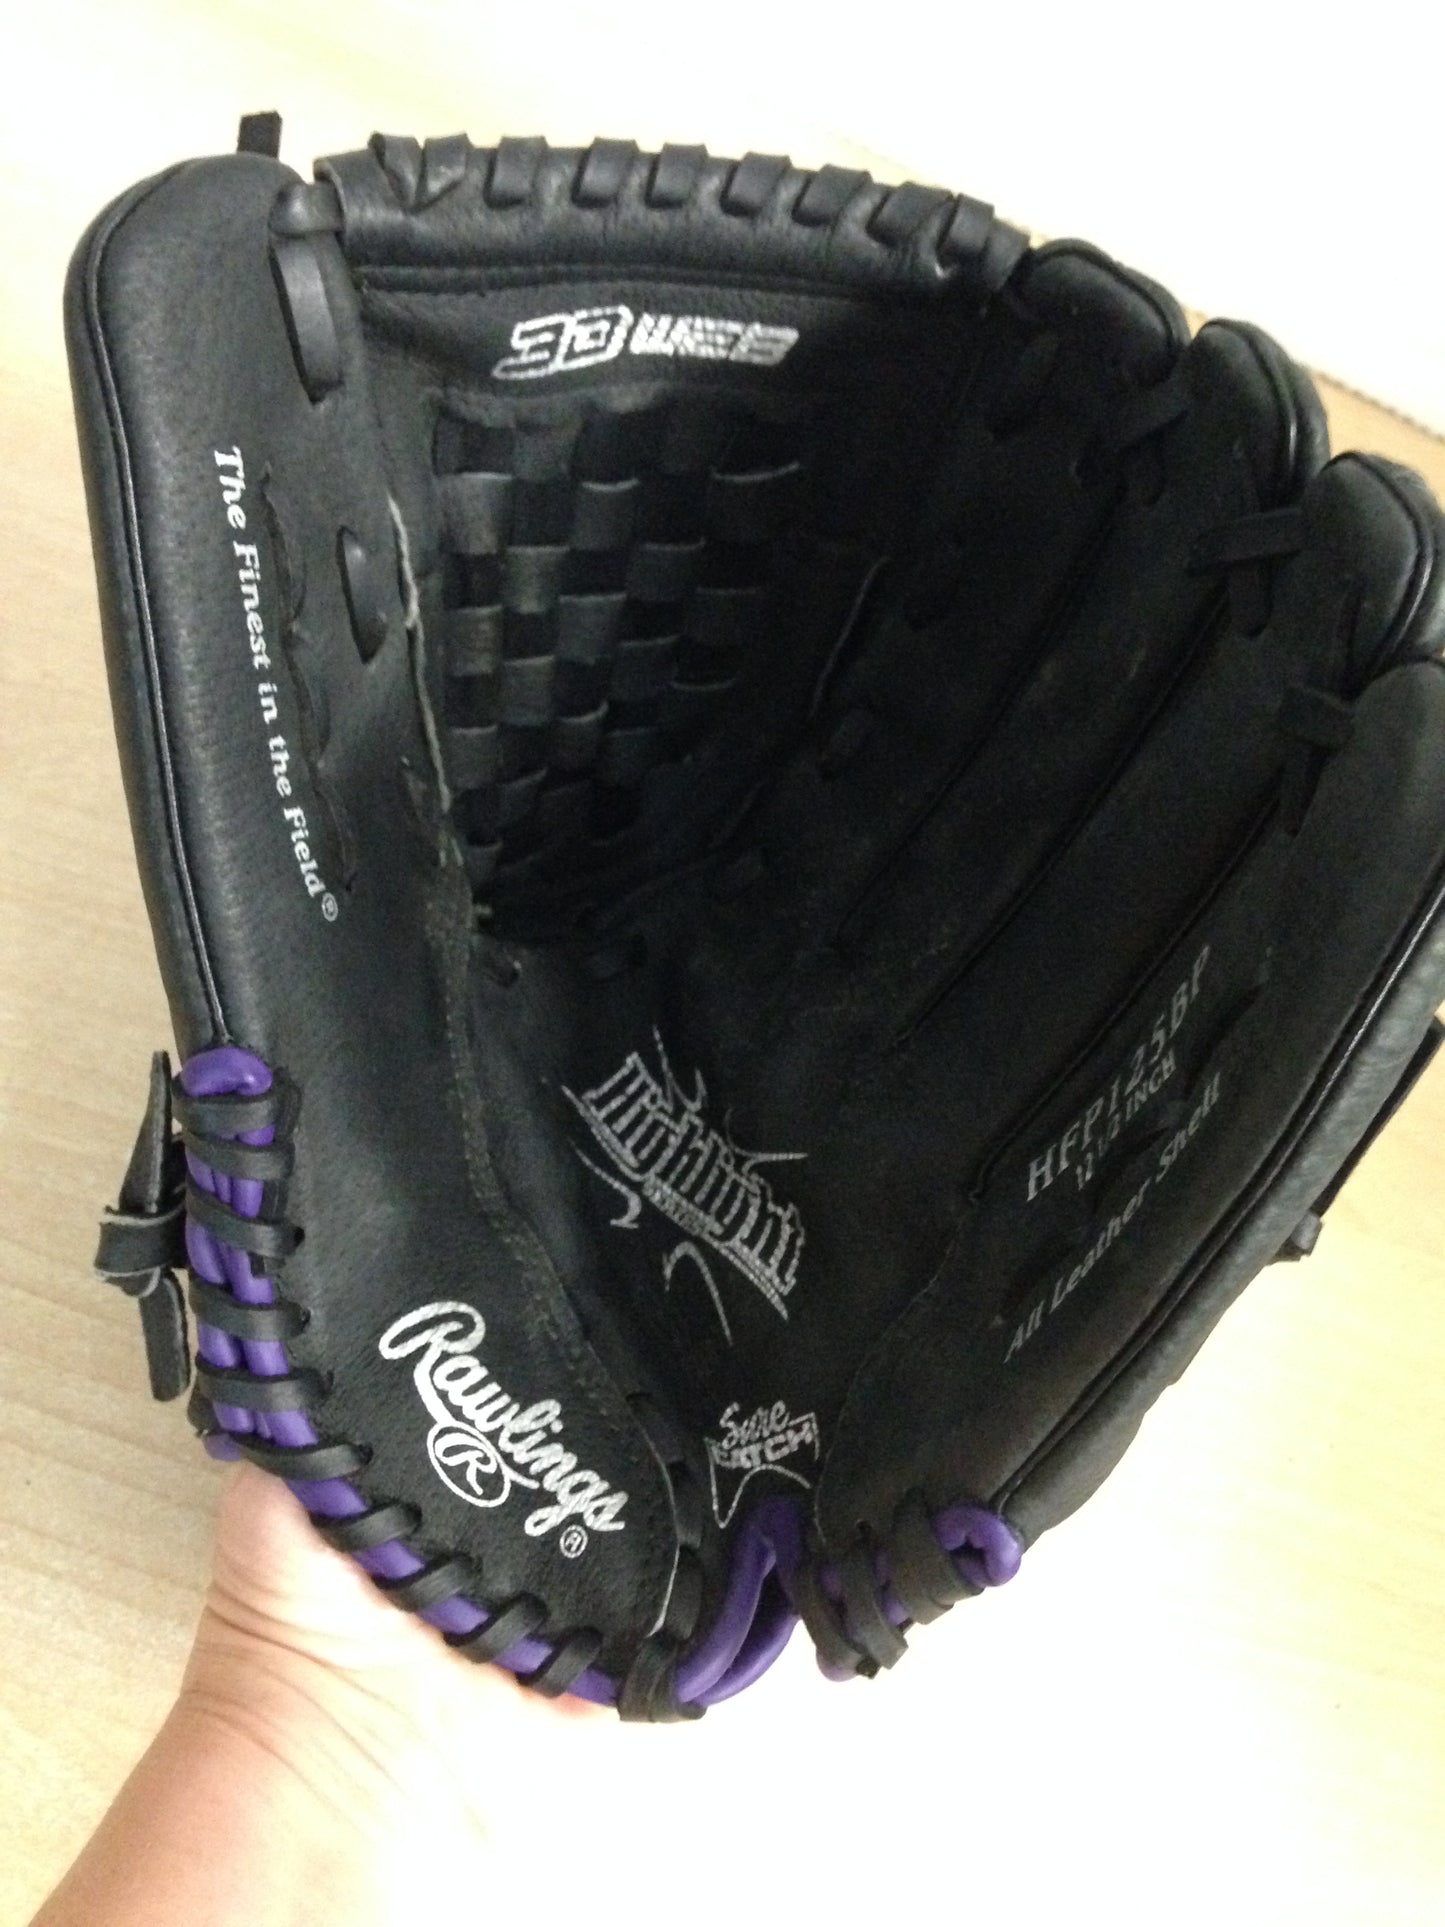 Baseball Glove Adult Size 12.5 inch Rawlings Gold Glove Black Purple Soft Leather As New Fits on Left Hand